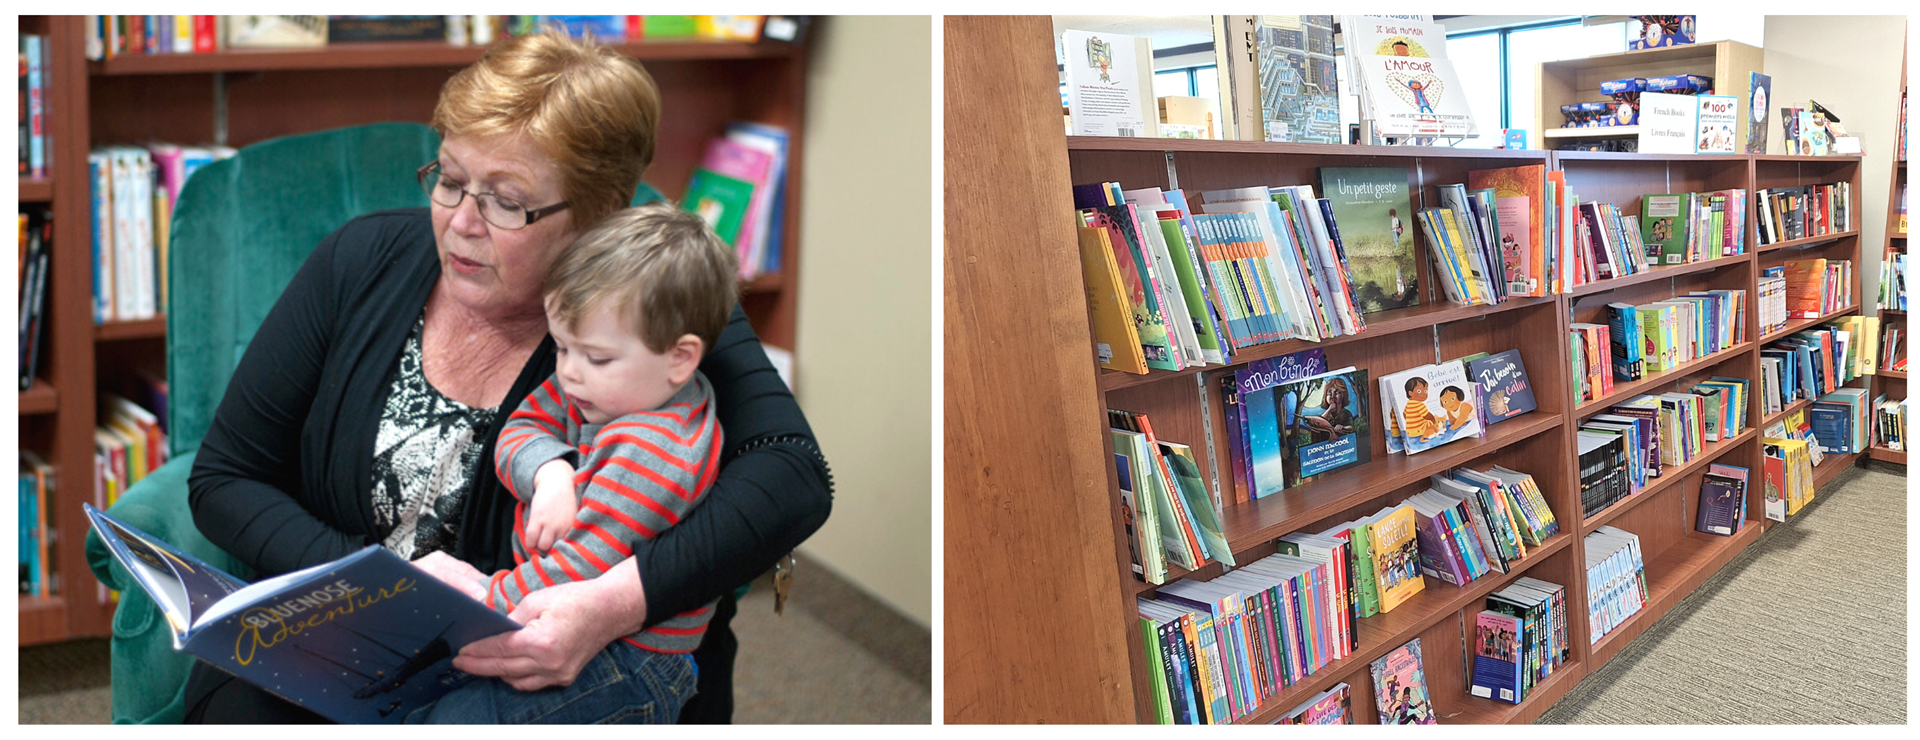 A photo of Anne Whebby reading to a child. A photo of bookshelves at Tattletales.